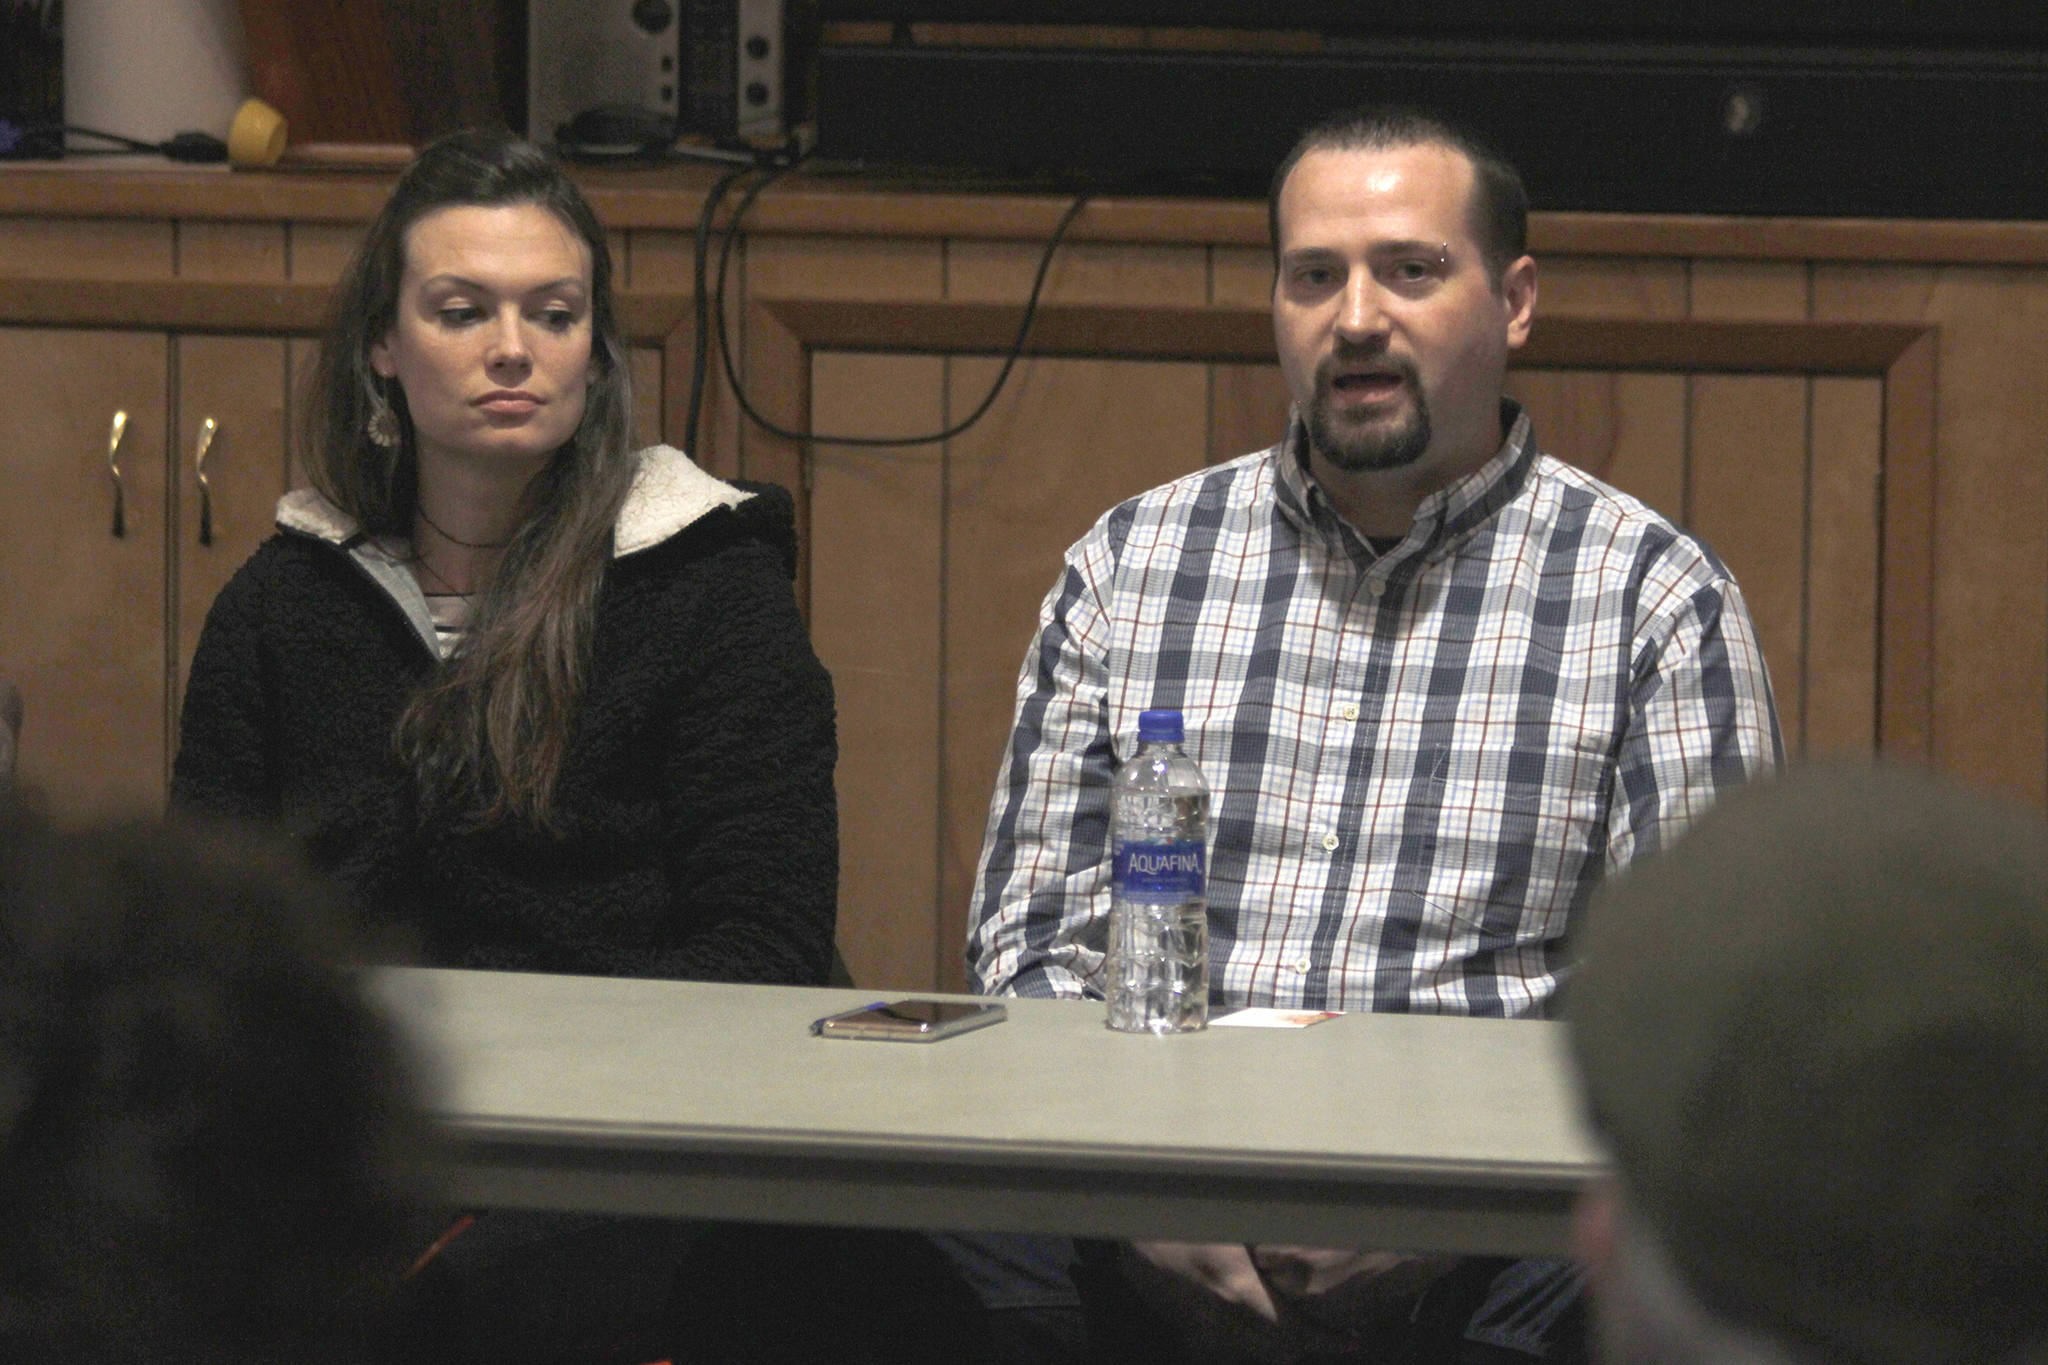 JAMHI Health and Wellness employees Carrie Amott and Mike Van Linden, both of whom are in long-term recovery, speak about their experiences and views on Senate Bill 91 at Northern Light United Church on Saturday, March 16, 2019. (Alex McCarthy | Juneau Empire)